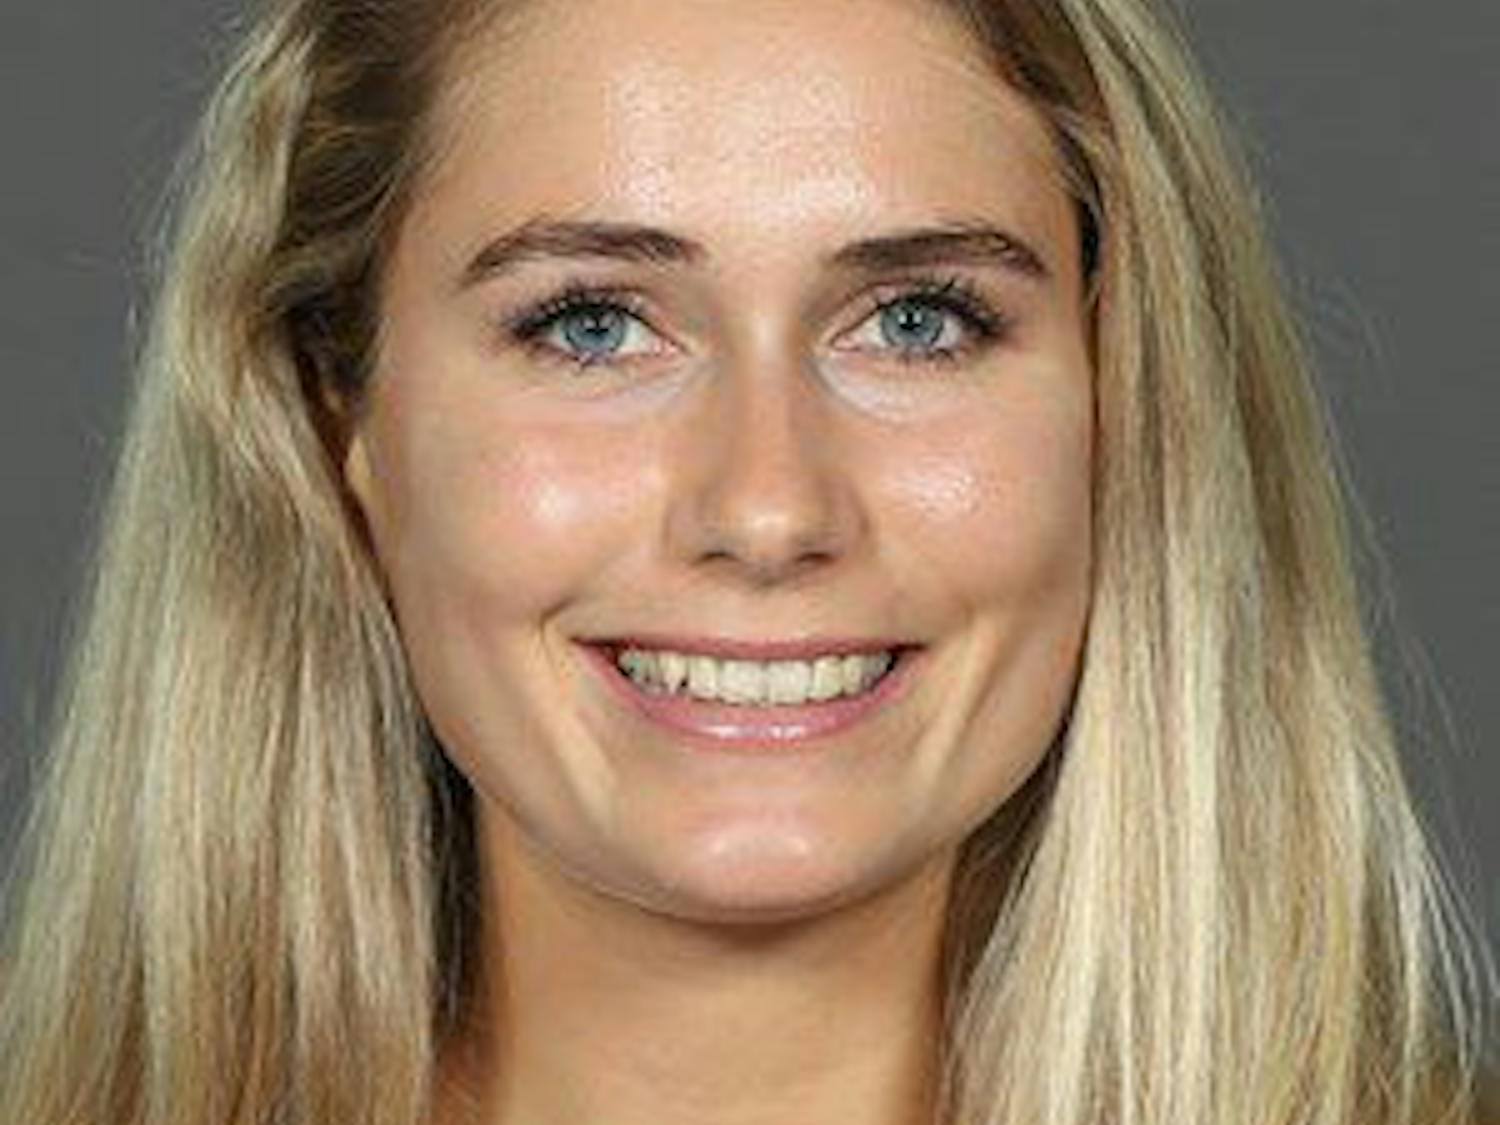 Sophomore Ida Jarlskog nearly completed an improbable comeback Thursday. She lost to Vanderbilt's Fernanda Contreras, 6-1, 0-6, 6-4 in the round of 16 at the ITA Fall National Championships.&nbsp;